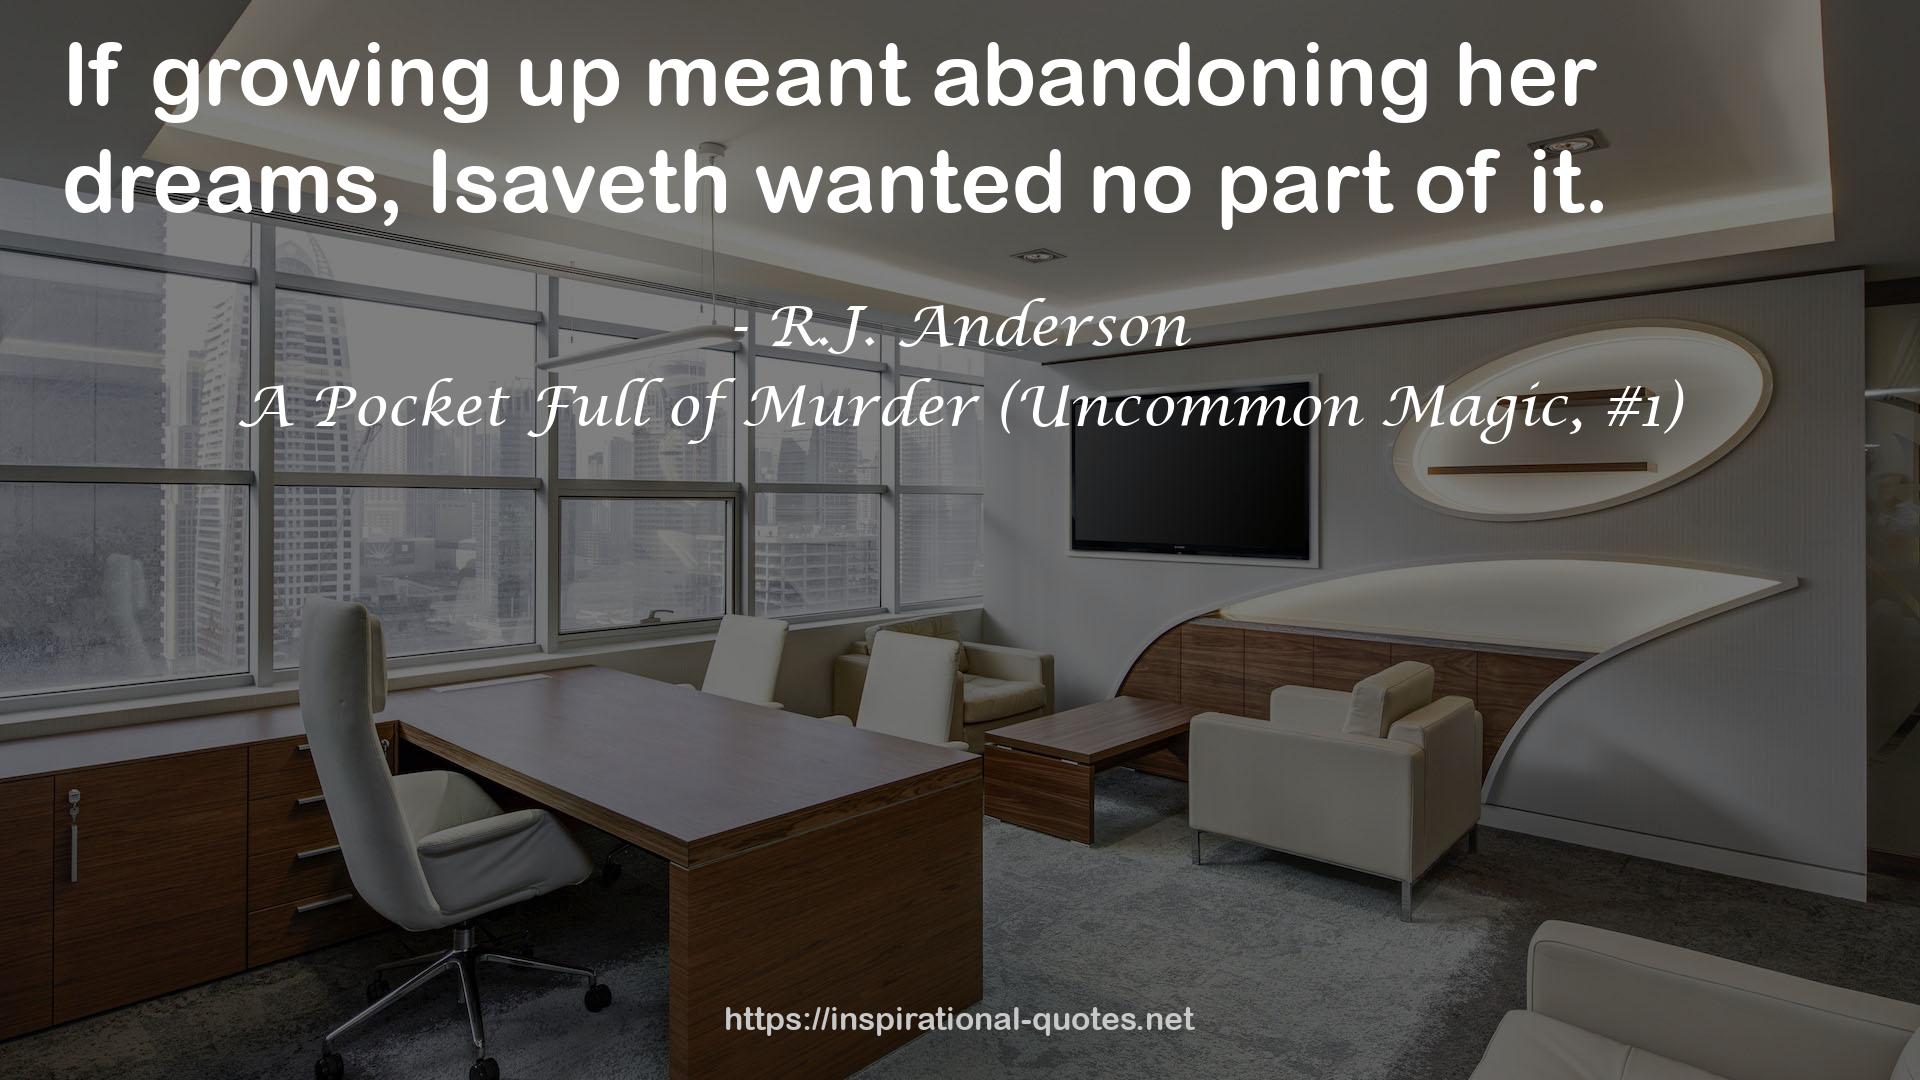 A Pocket Full of Murder (Uncommon Magic, #1) QUOTES